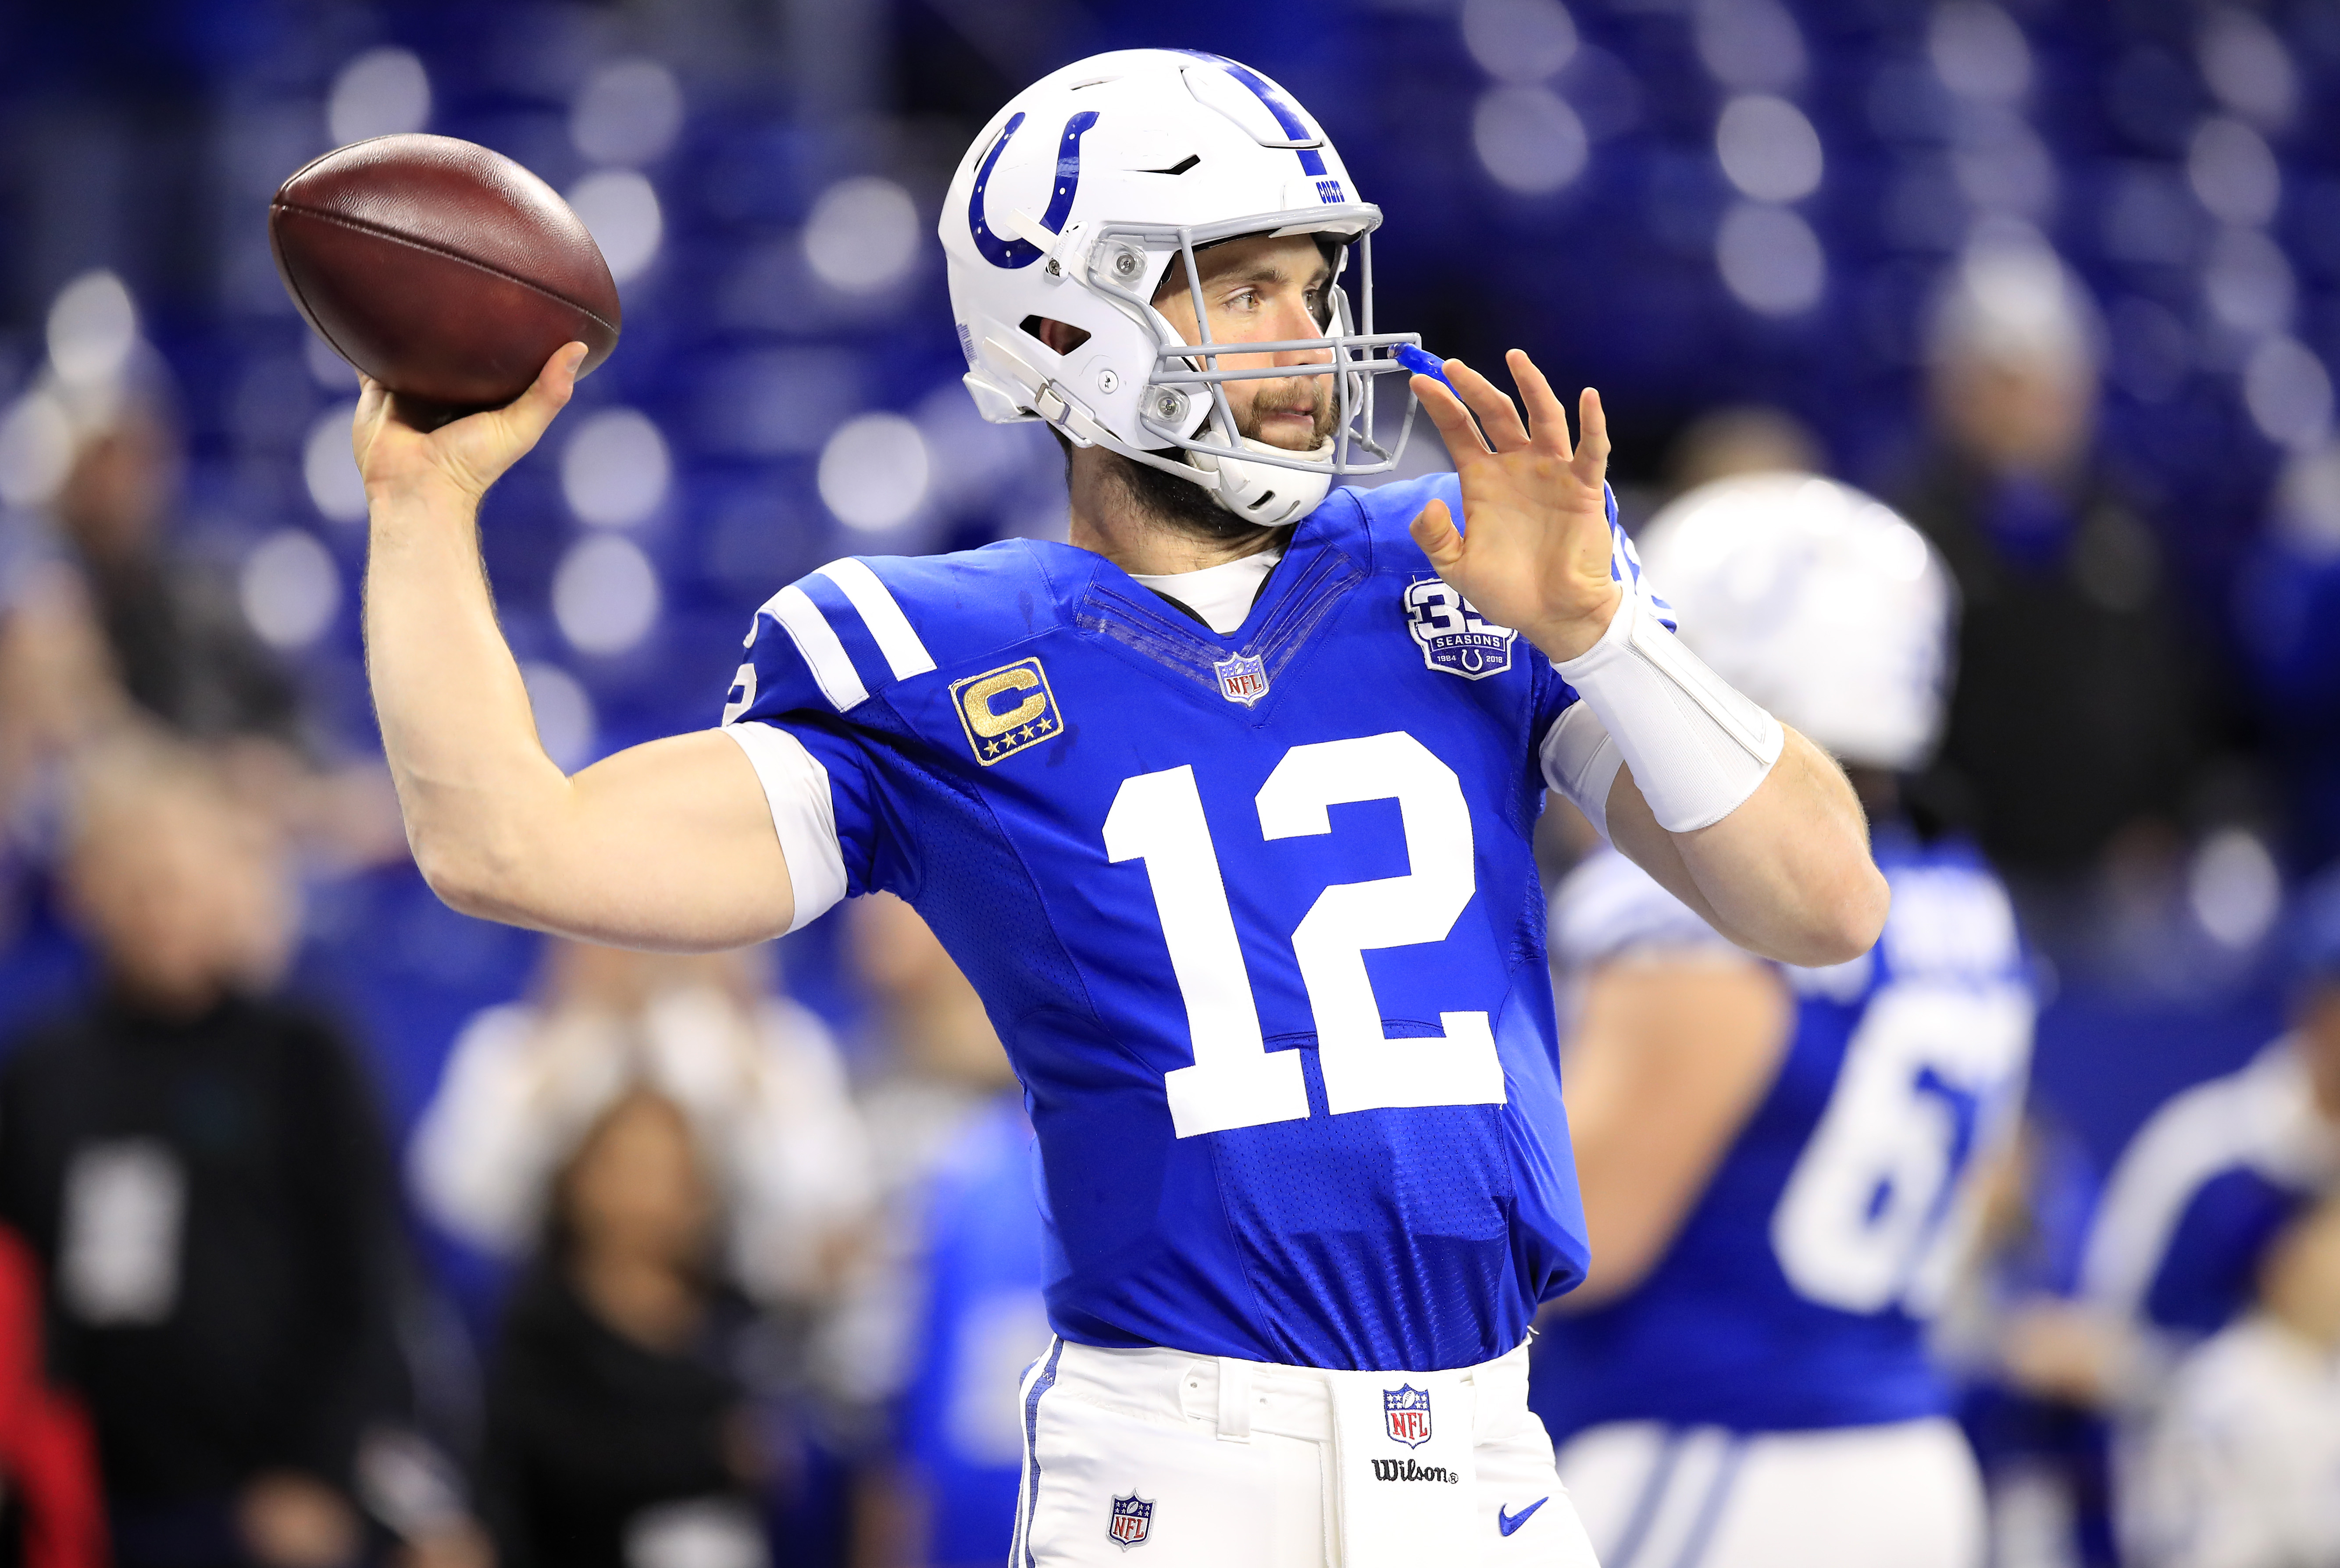 Andrew Luck #12 of the Indianapolis Colts throws a pass before the game against the New York Giants at Lucas Oil Stadium, on December 23, 2018, in Indianapolis, Indiana. | Source: Getty Images